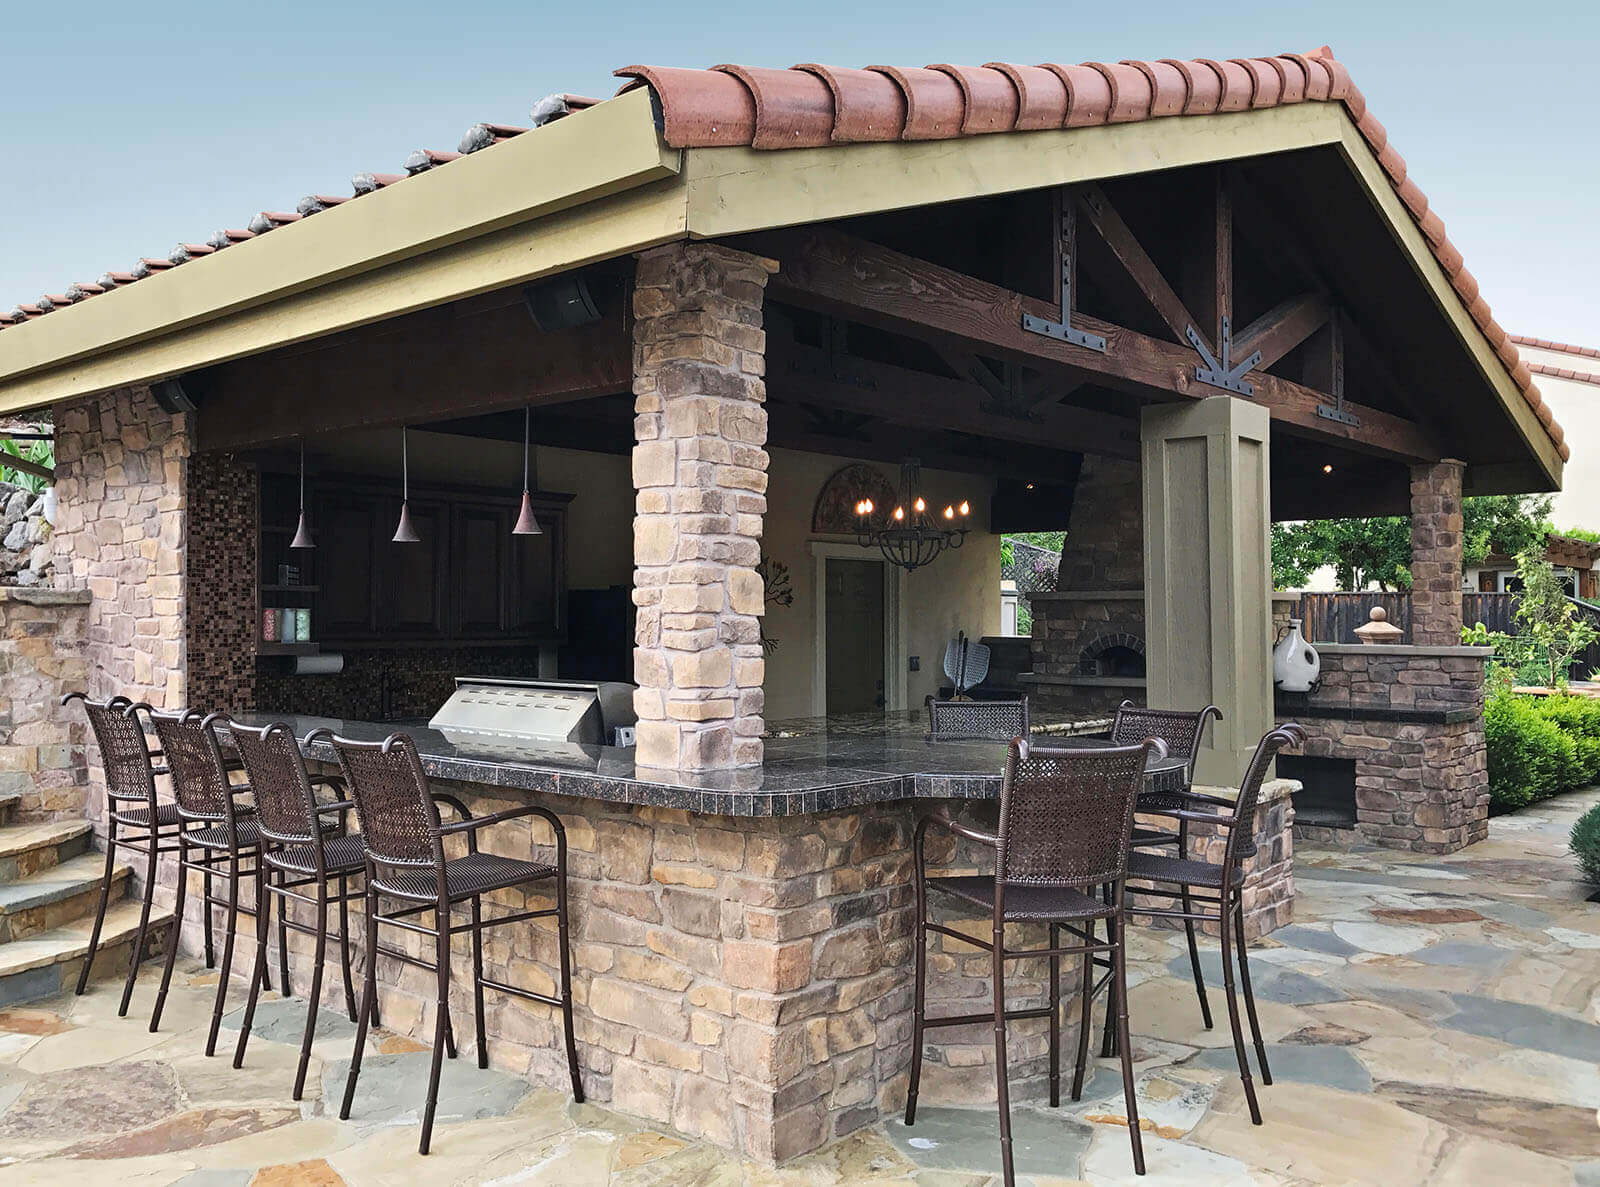 Pergola with mission-style tile roof covers outdoor bar, dining, bbq and fireplace with stone detailing on flagstone patio